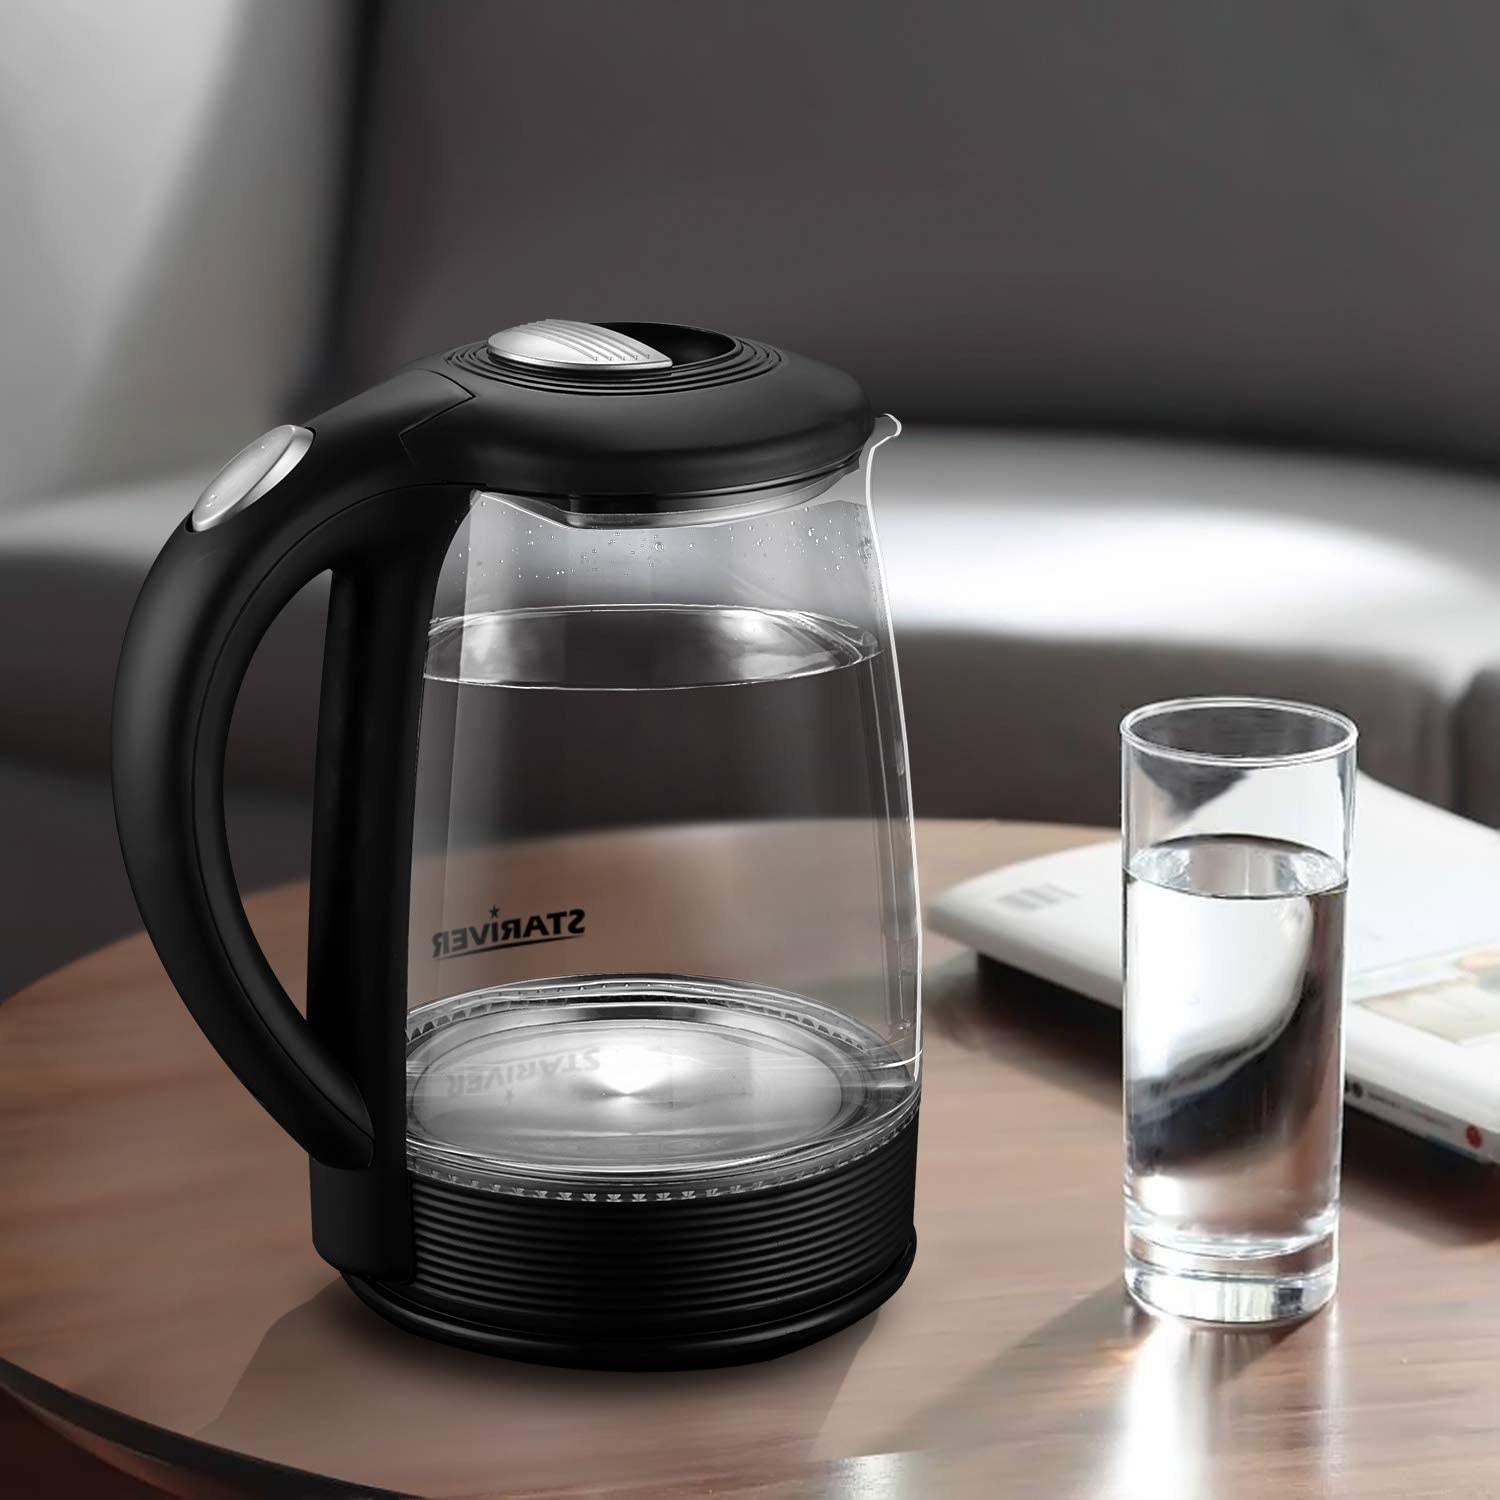 Stariver electric kettle with black and silver accents and a glass bottle